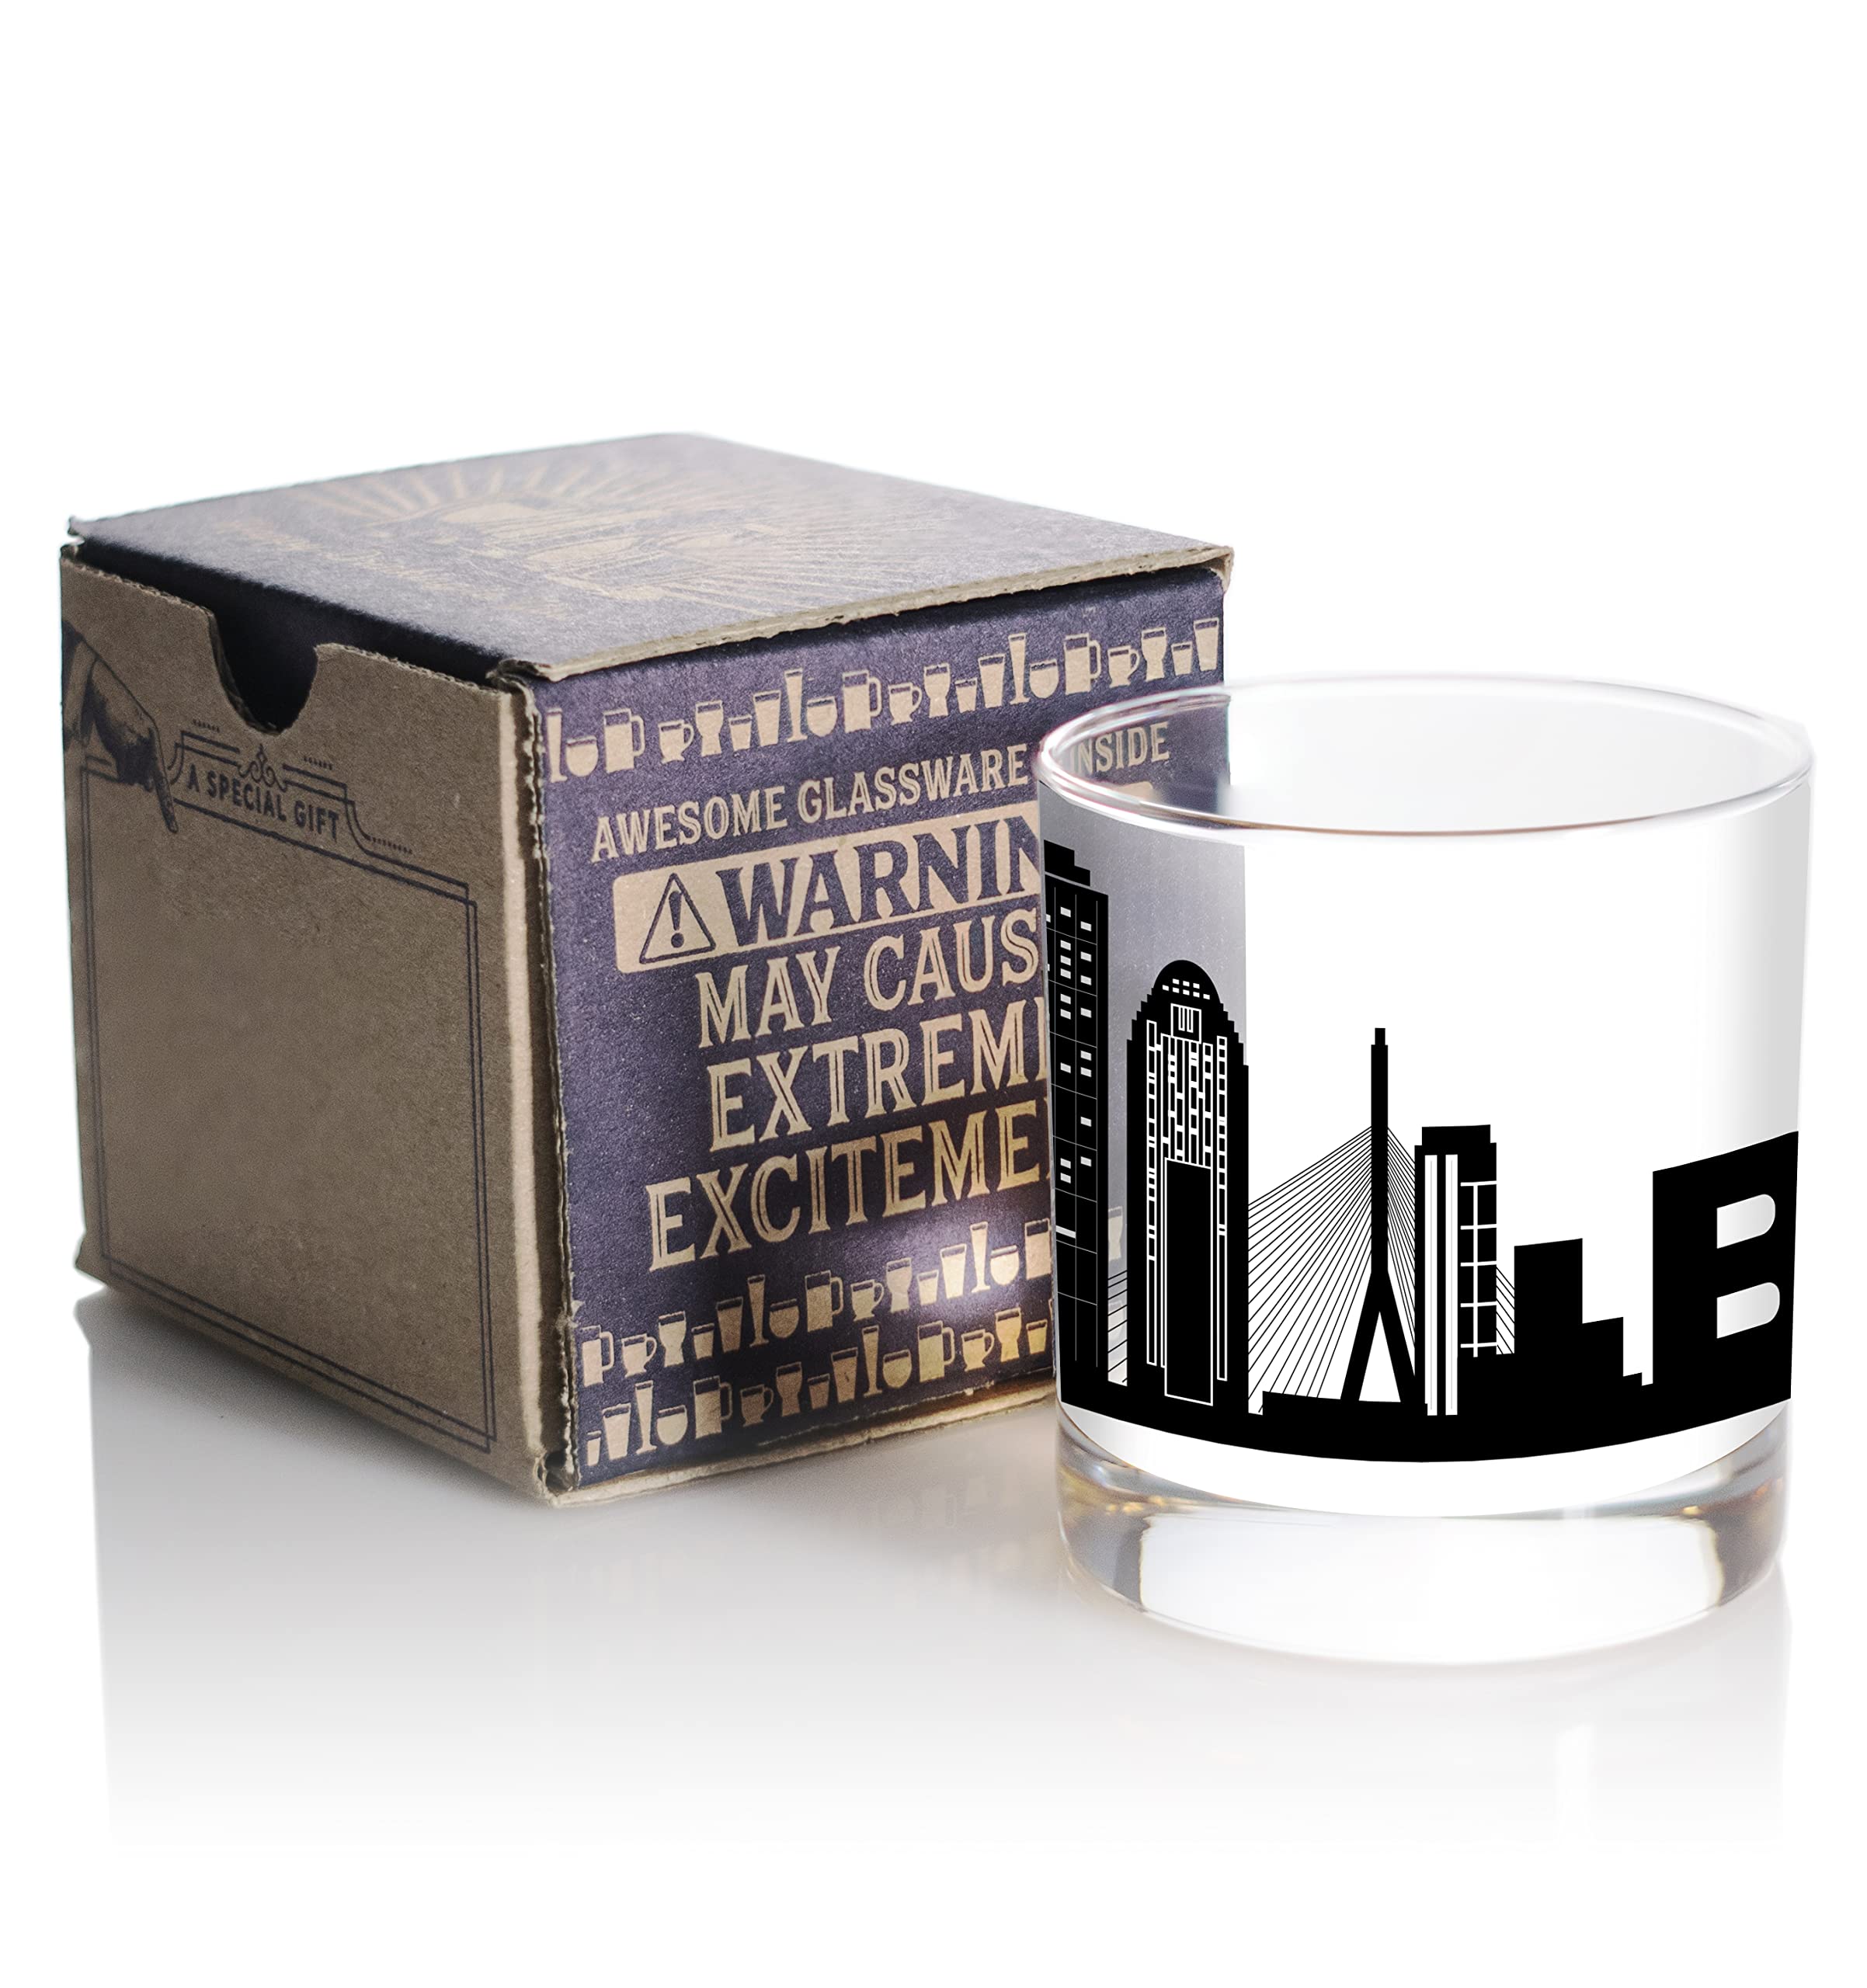 Toasted Tales - Boston Skyline Cityscapes Whiskey Glass | Gift for Boston City People | Old Fashioned Rocks Urban City Glasses | Boston City Lovers Gift | American City Drinkwares Collection (11 oz)